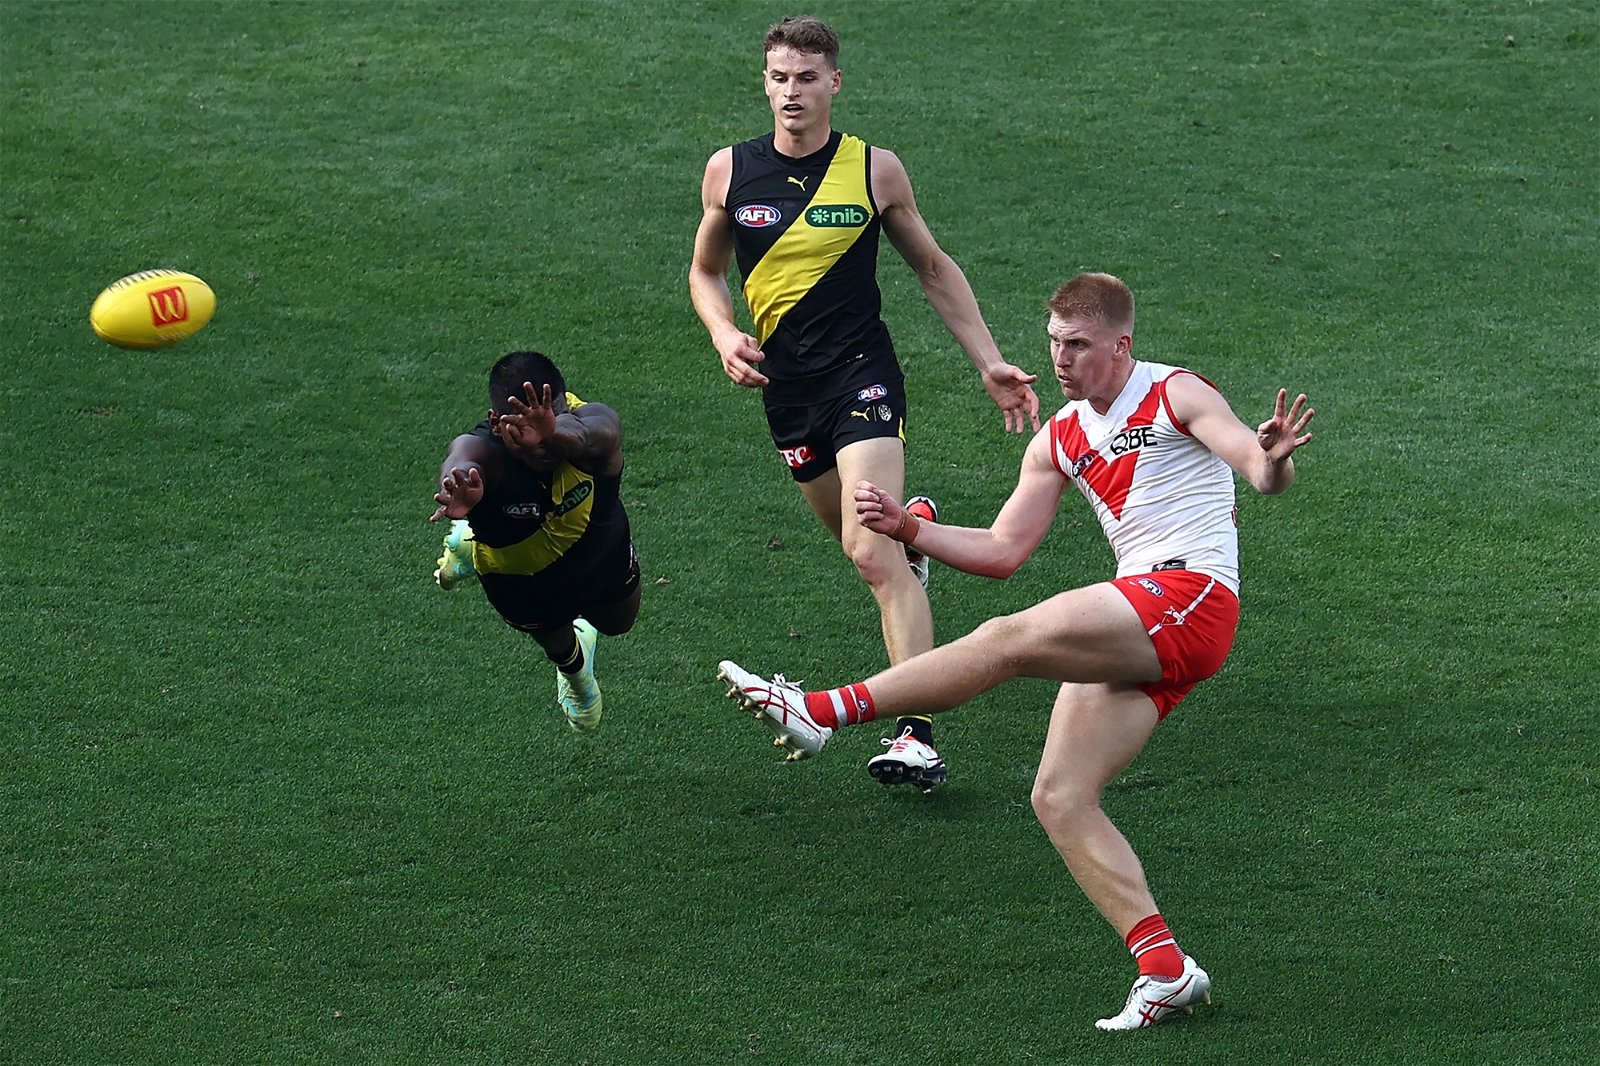 Maurice Rioli dives to smother